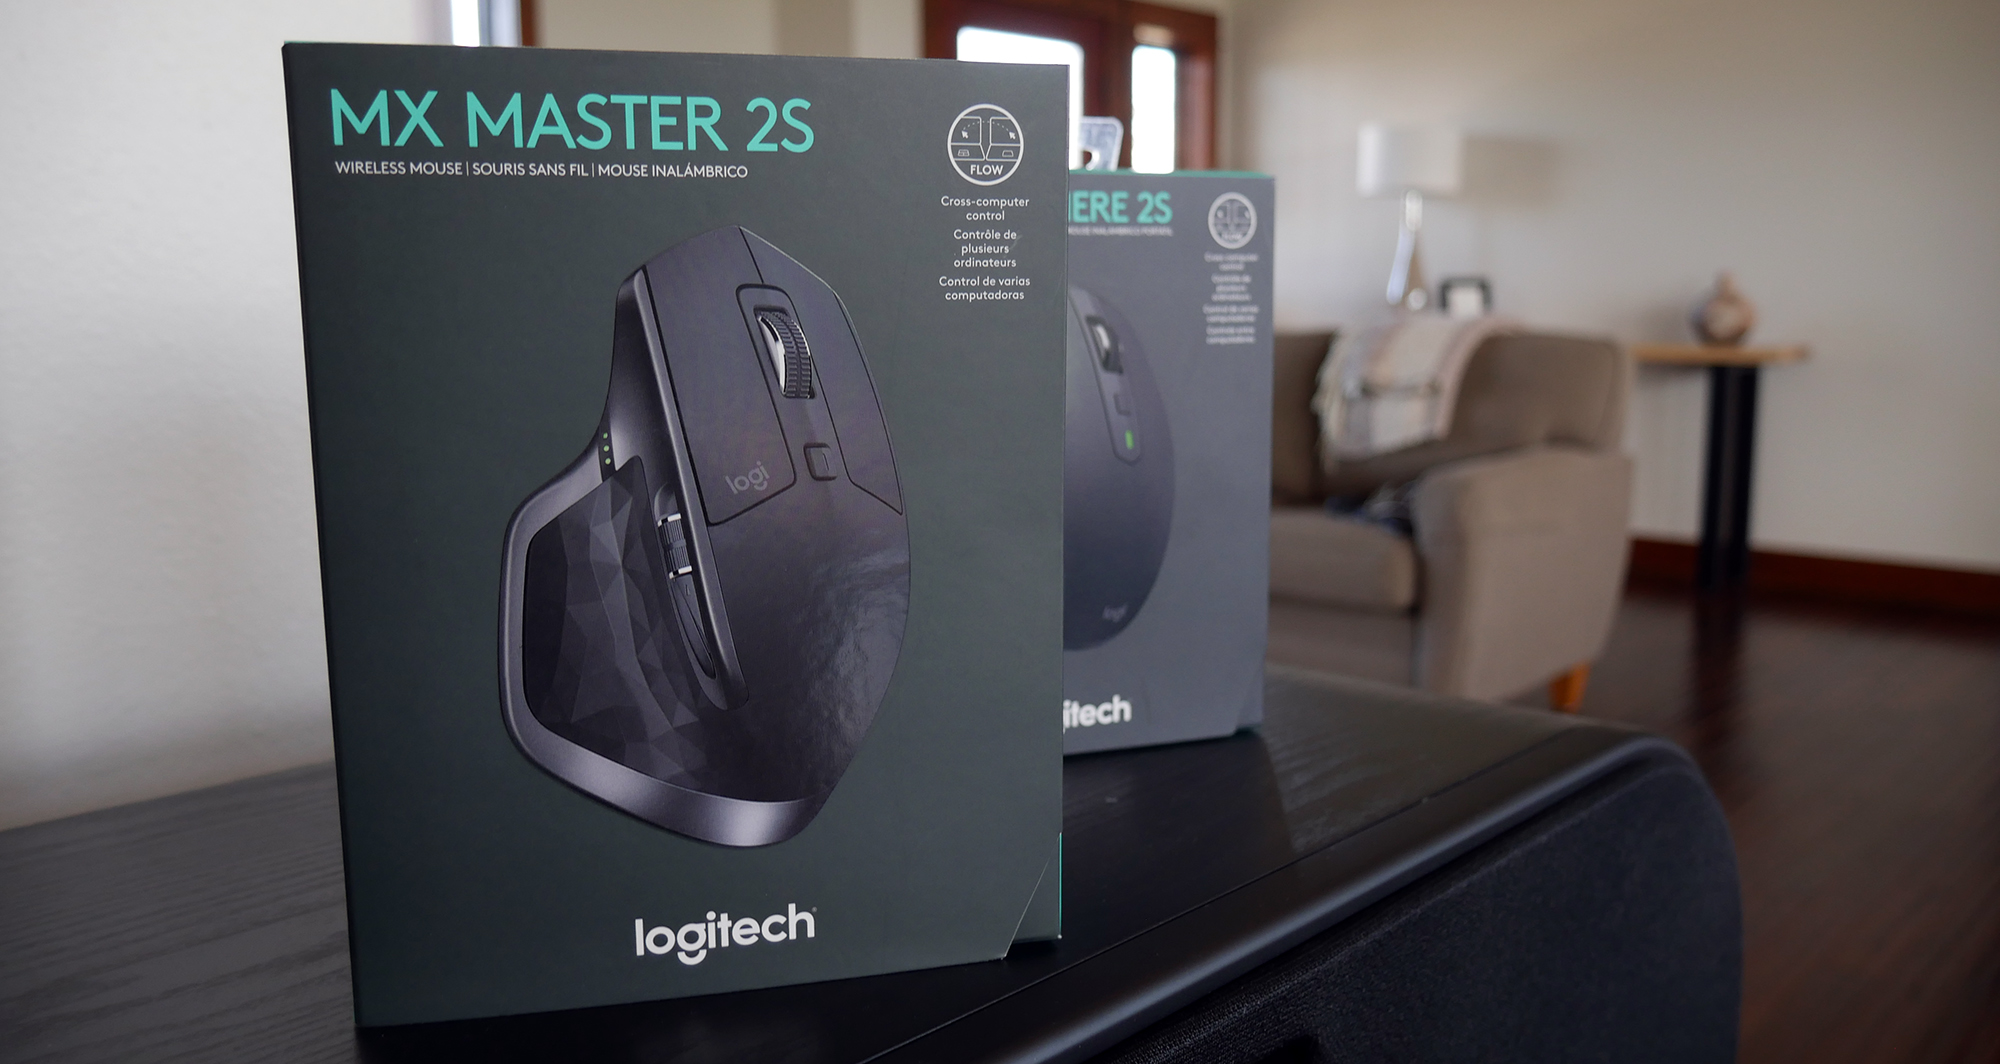 logitech mx master 2s wireless mouse with cross-computer control for mac and windows